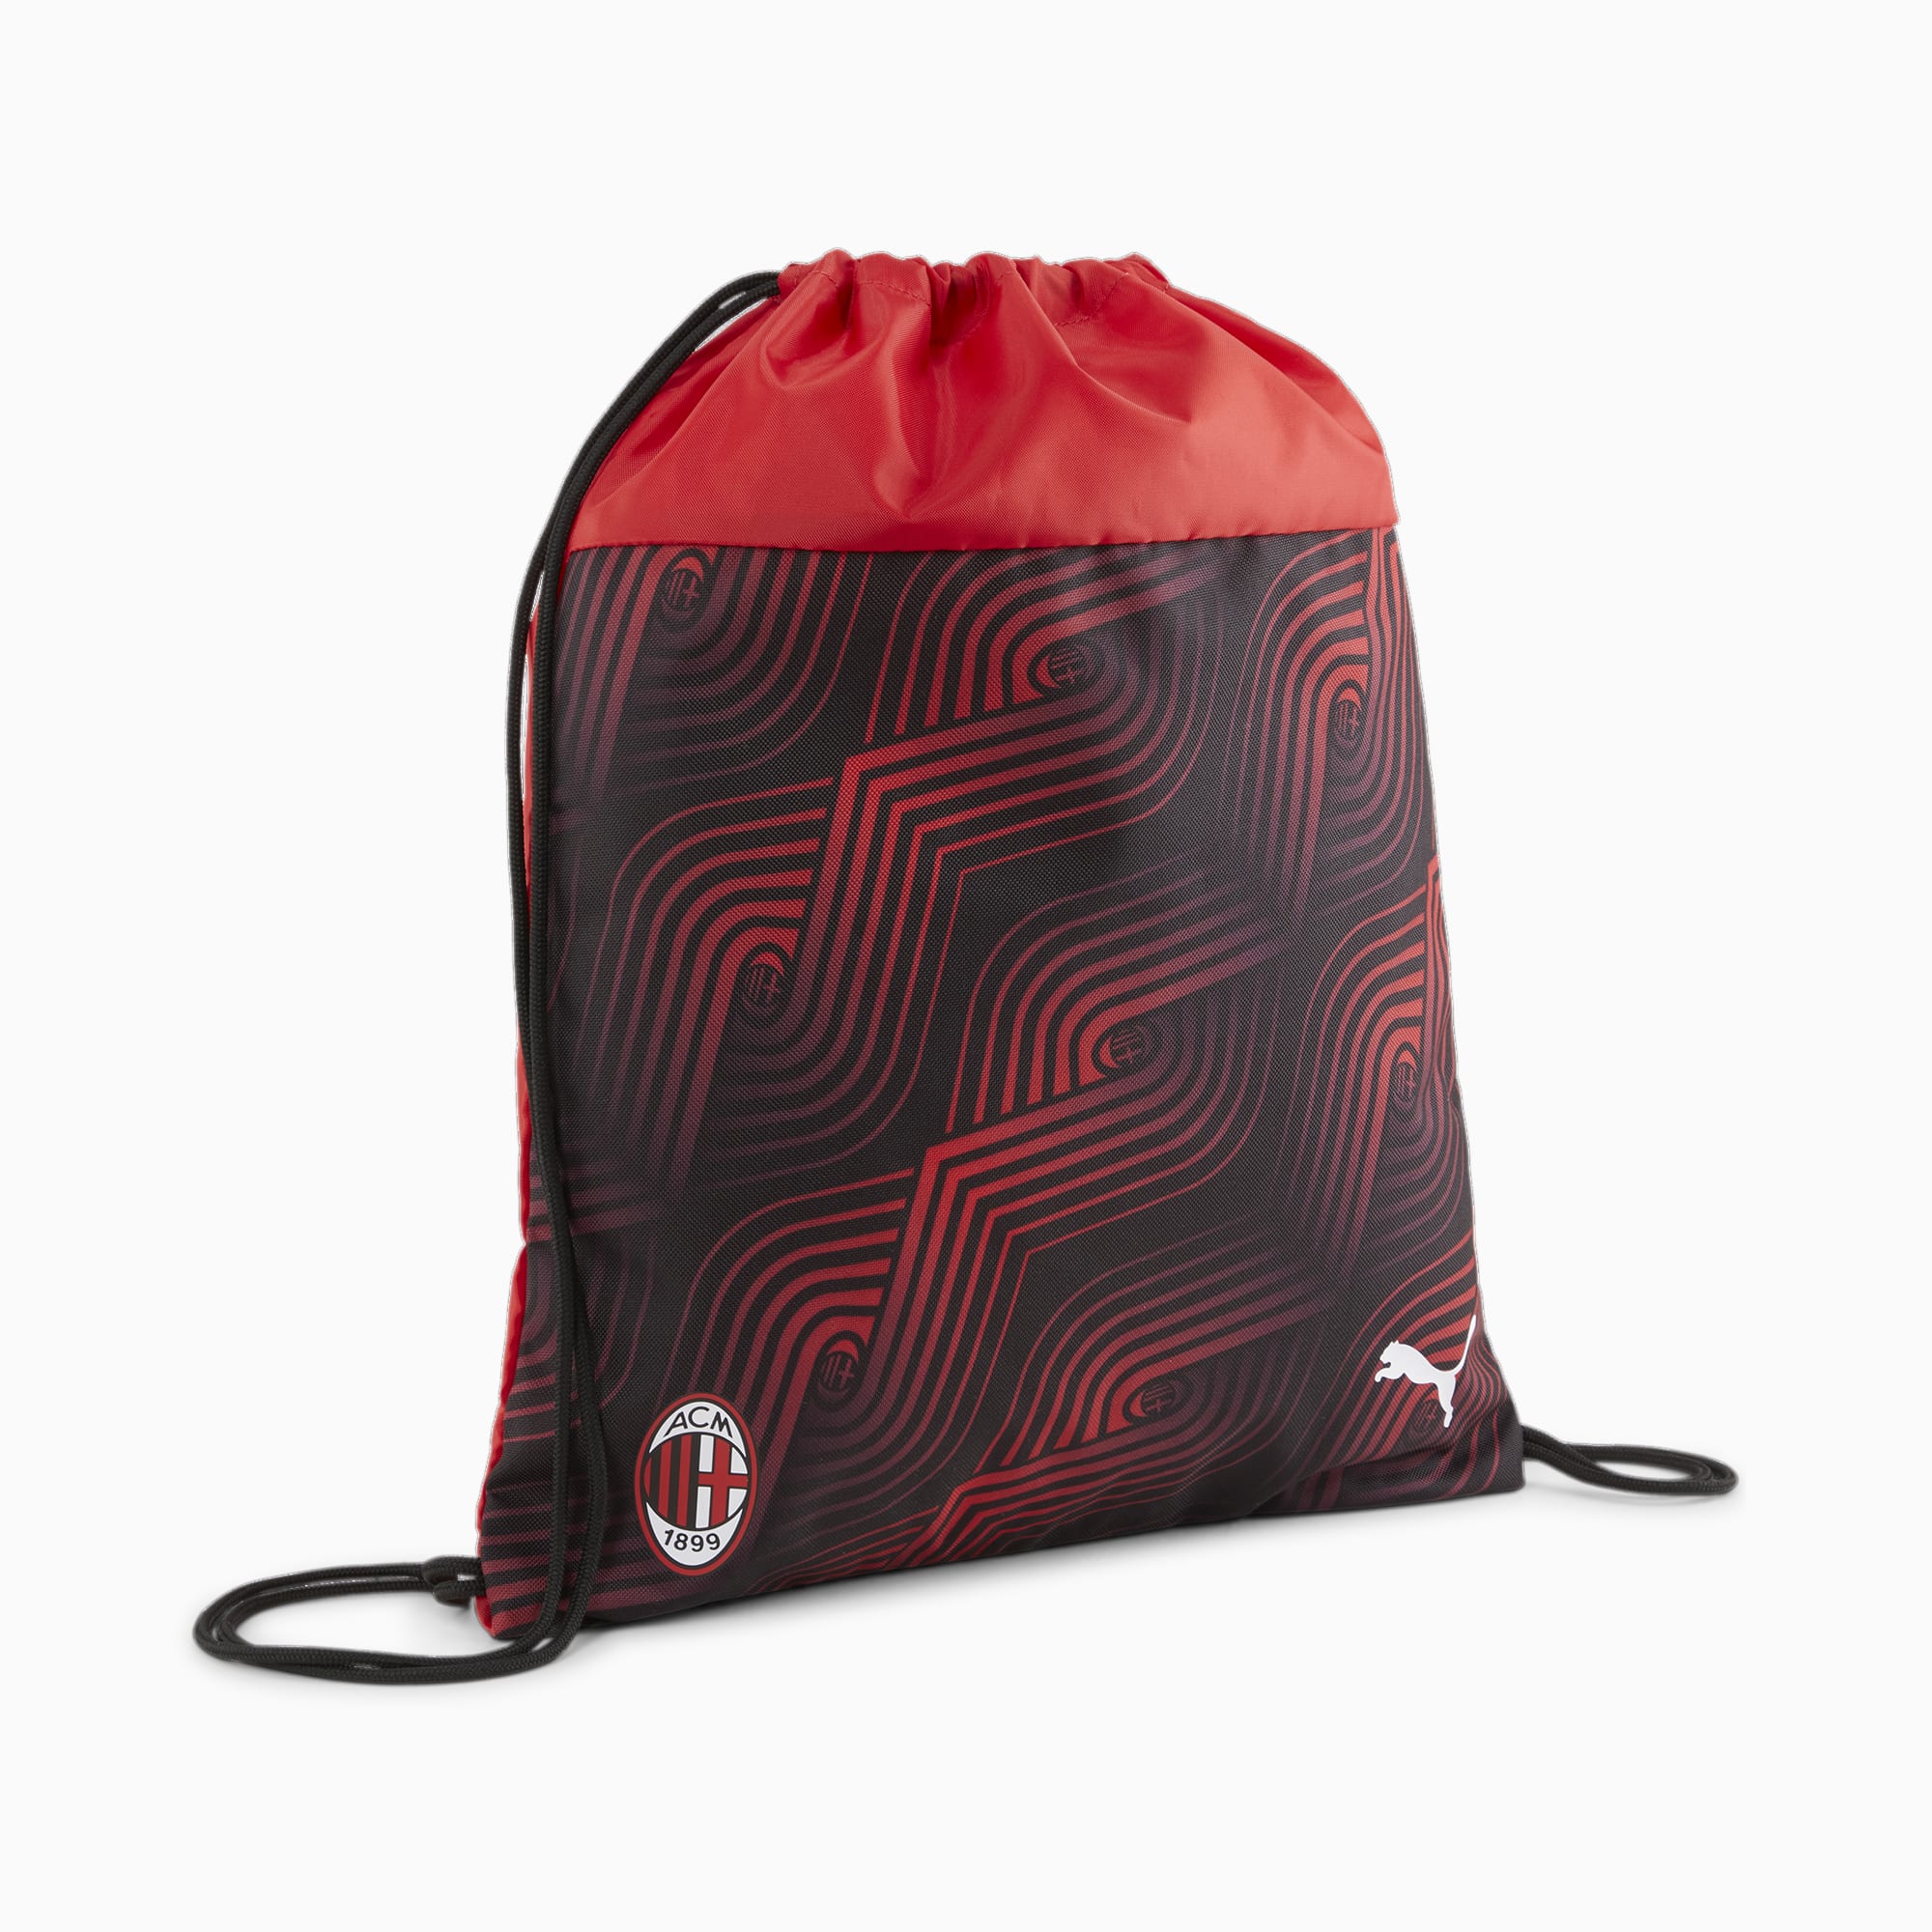 Women's PUMA AC Milan Gym Sack, Black/For All Time Red, Accessories